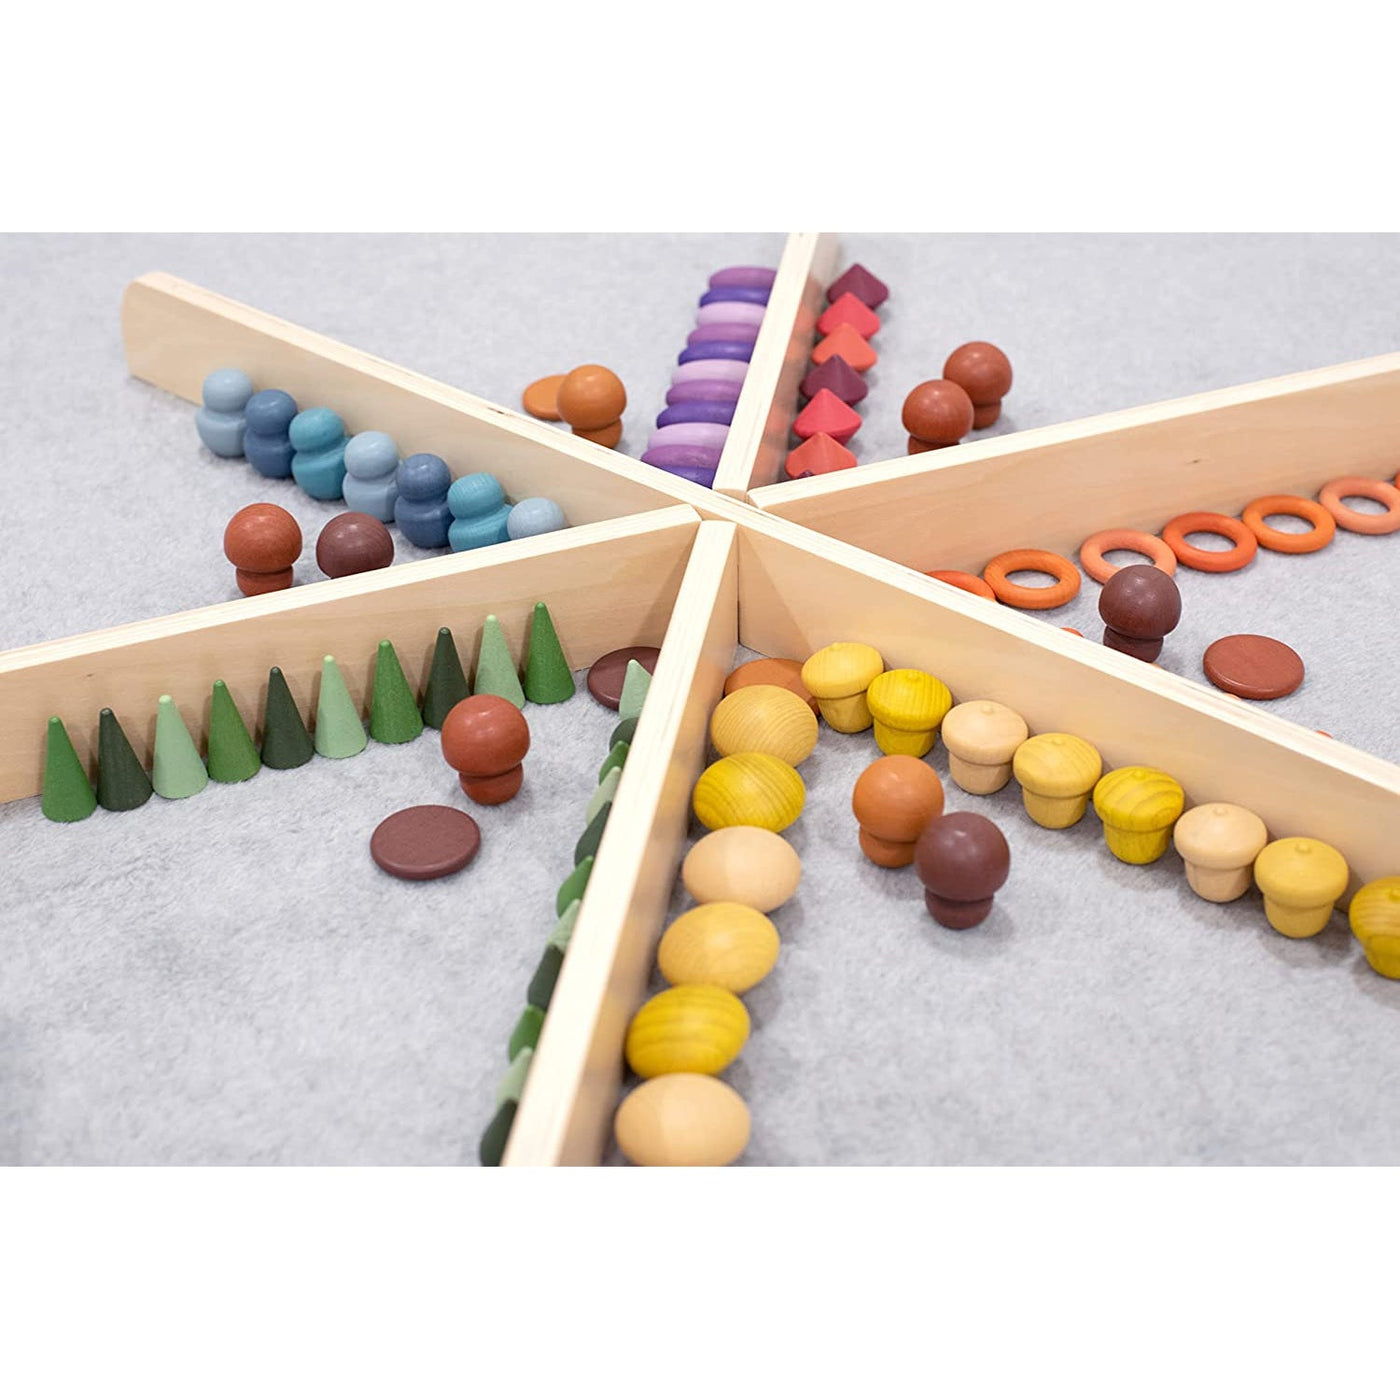 TickiT Wooden Discovery Dividers